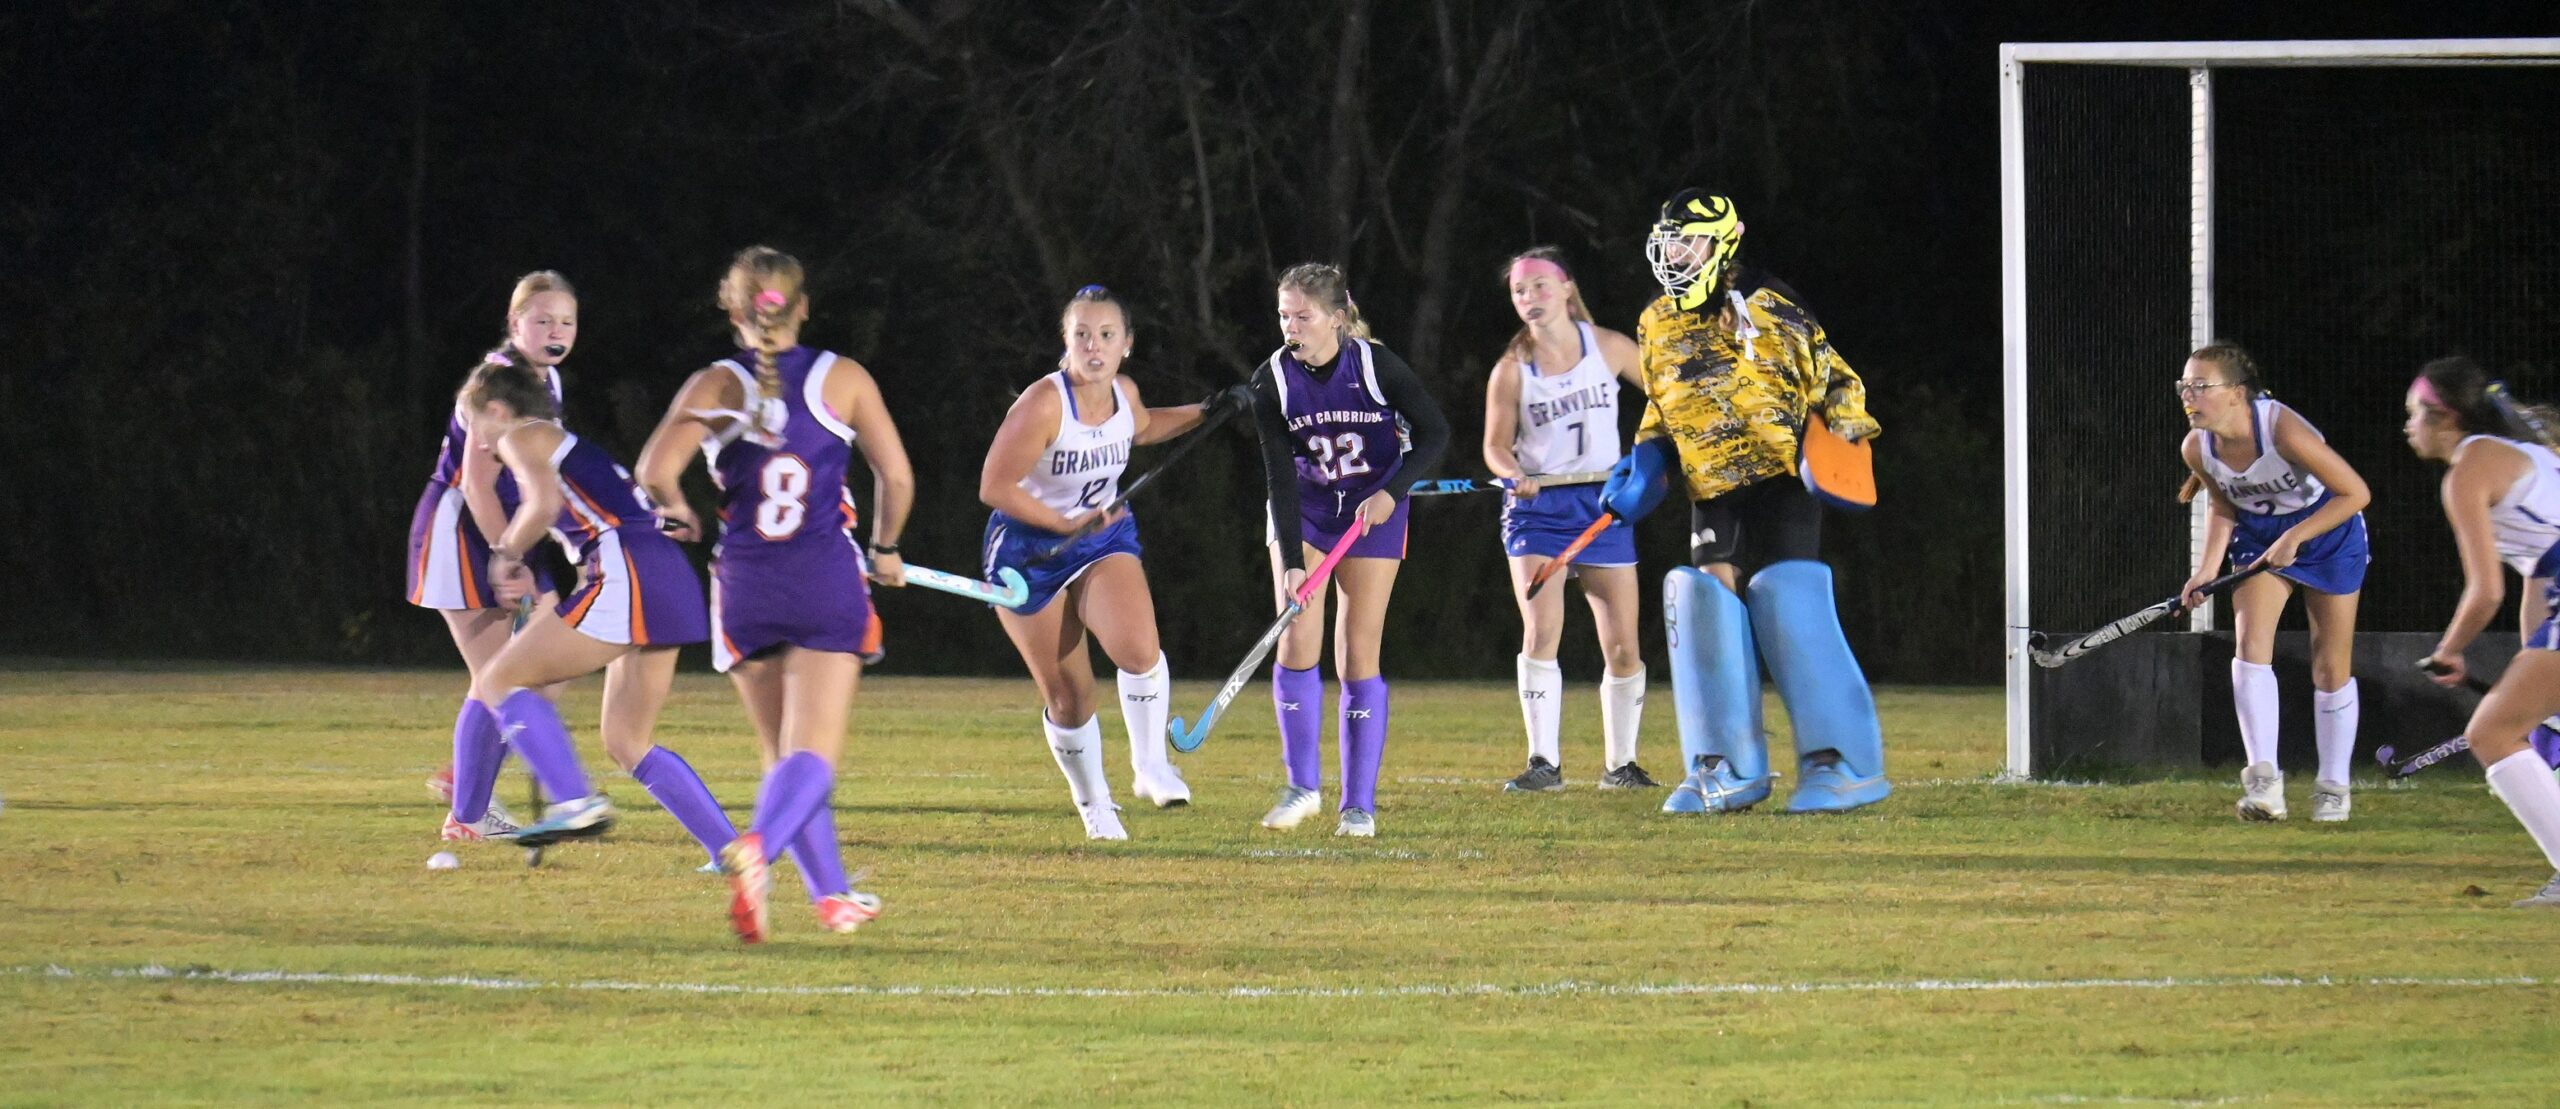 You are currently viewing Horde Seeded No. 3 in Field Hockey Sectionals